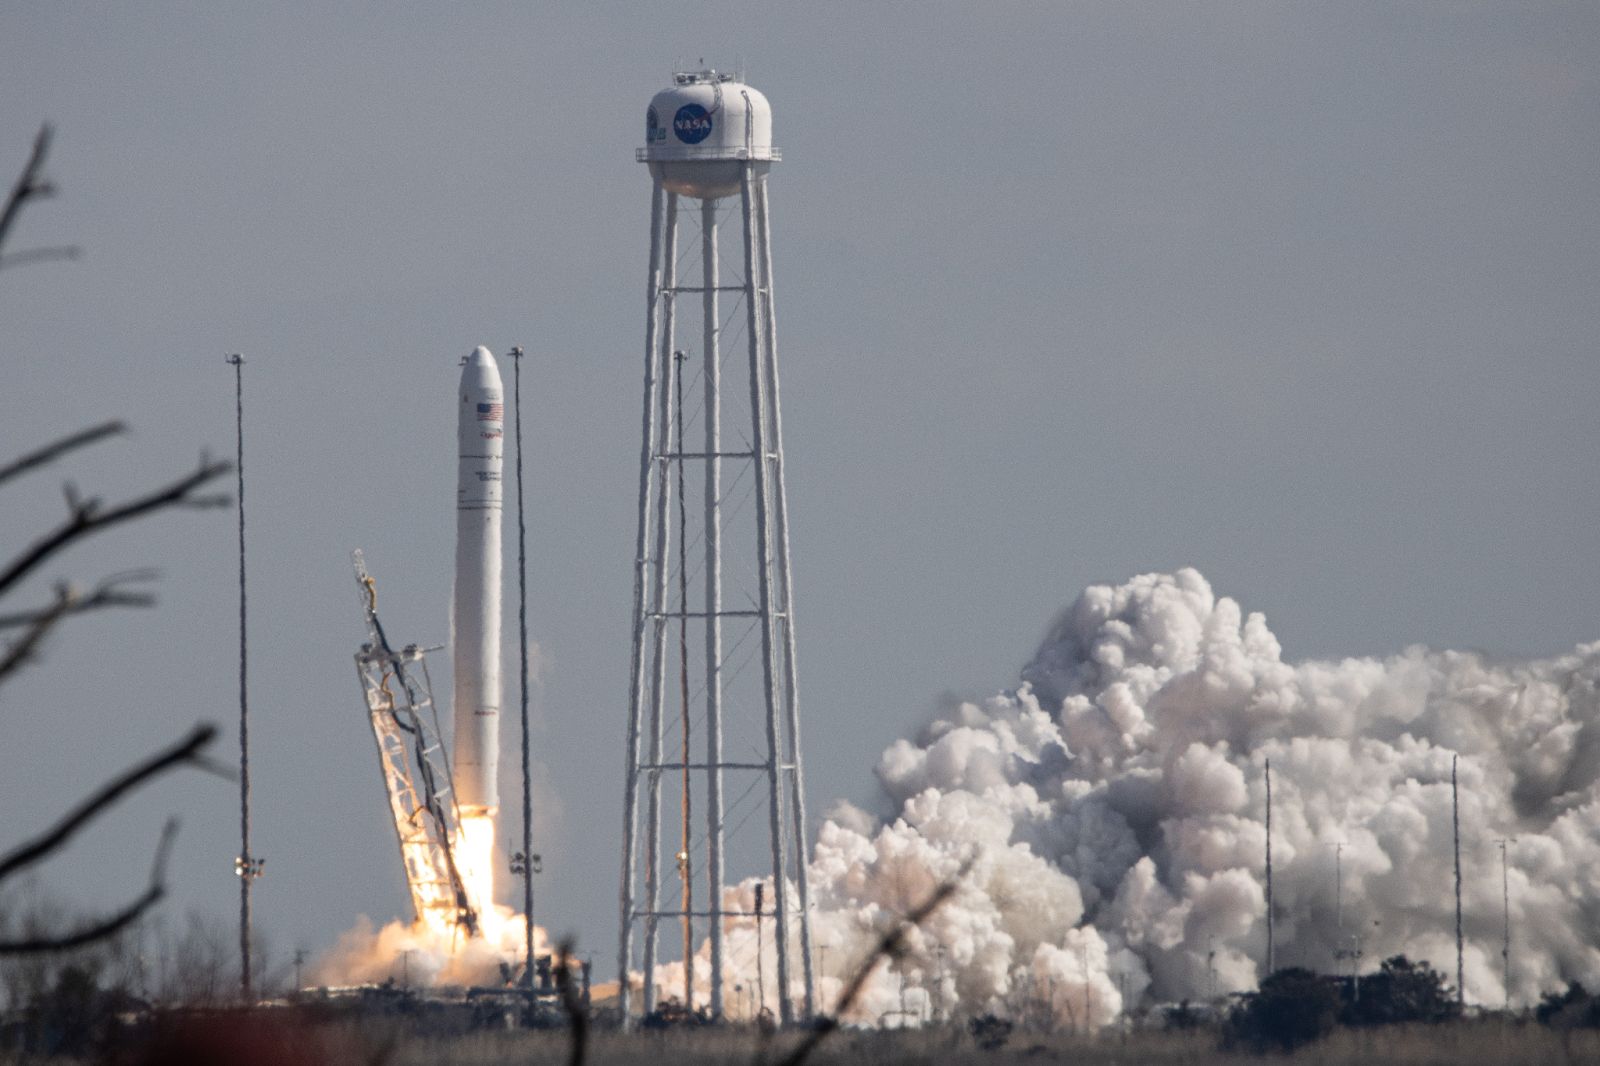 The 14th Antares lifts off from Wallops on February 20, 2021 (Picture by Joe Wakefield)